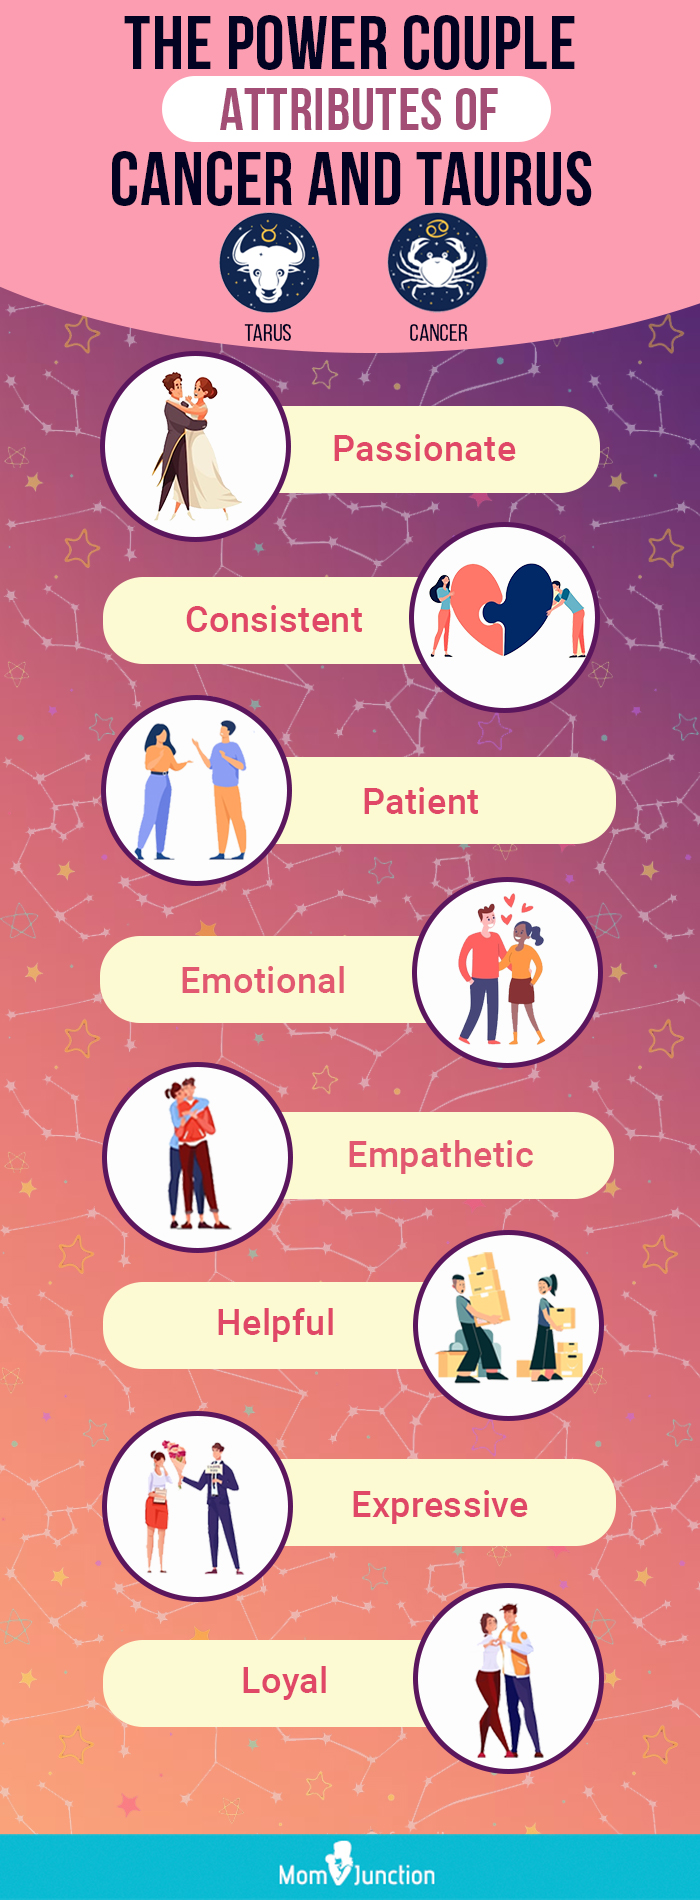 the power couple attributes of cancer and taurus (infographic)